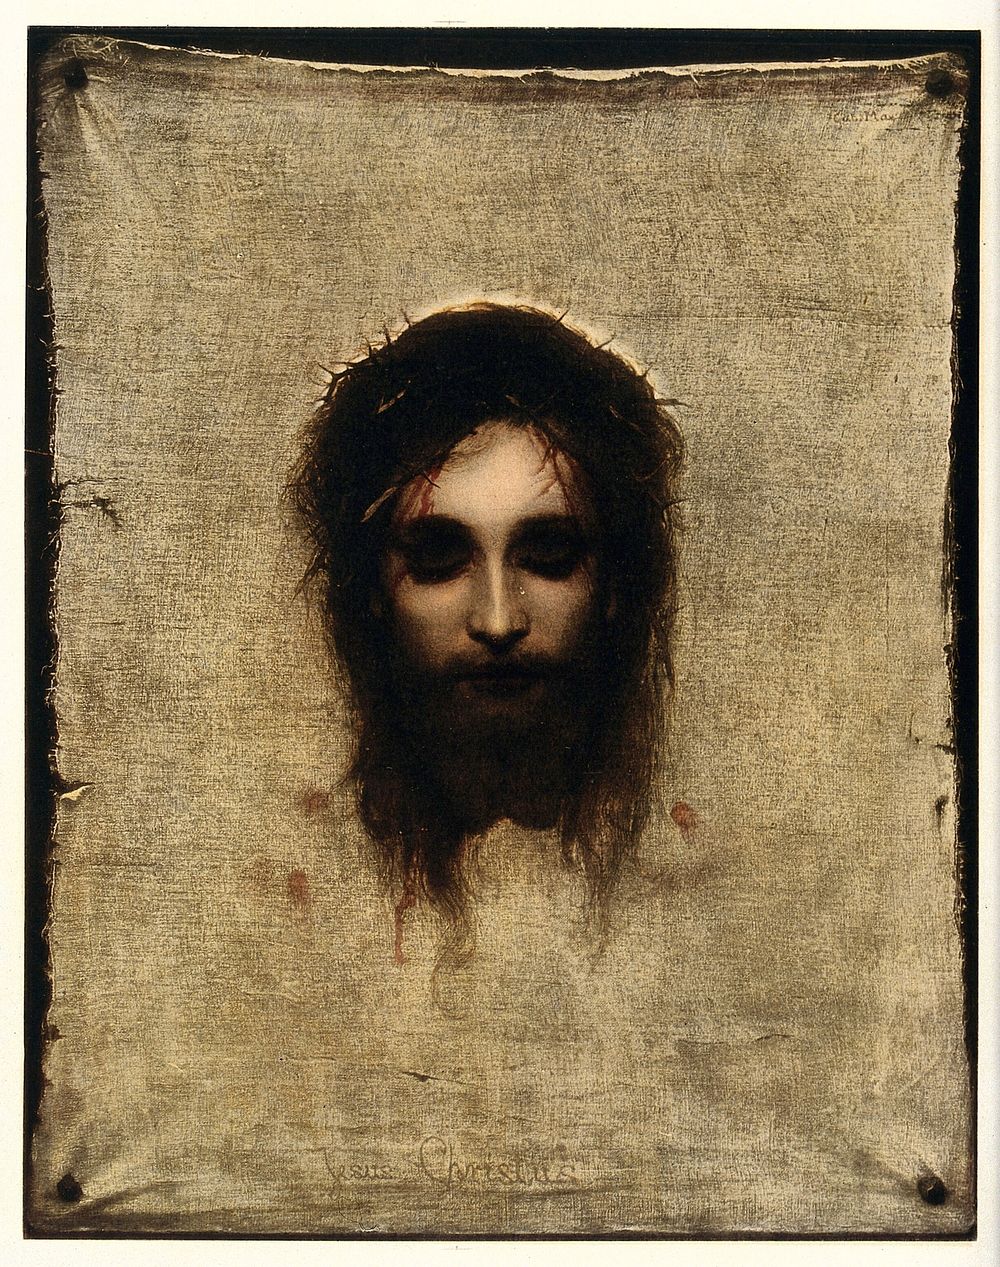 The veronica (sudarium of Saint Veronica), representing the face of Christ. Colour collotype after Gabriel Max.